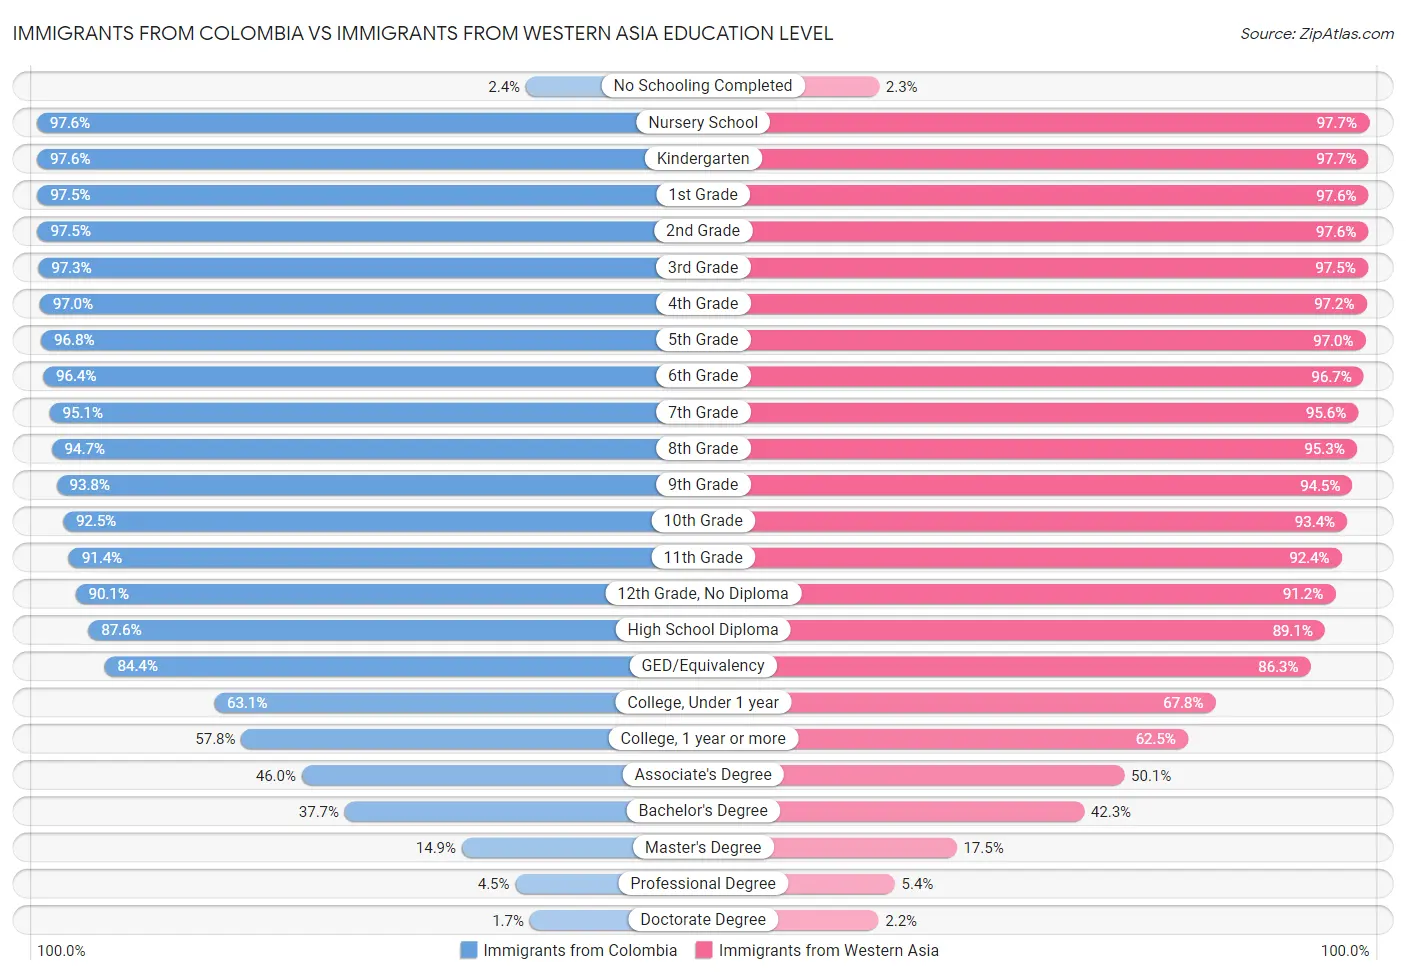 Immigrants from Colombia vs Immigrants from Western Asia Education Level